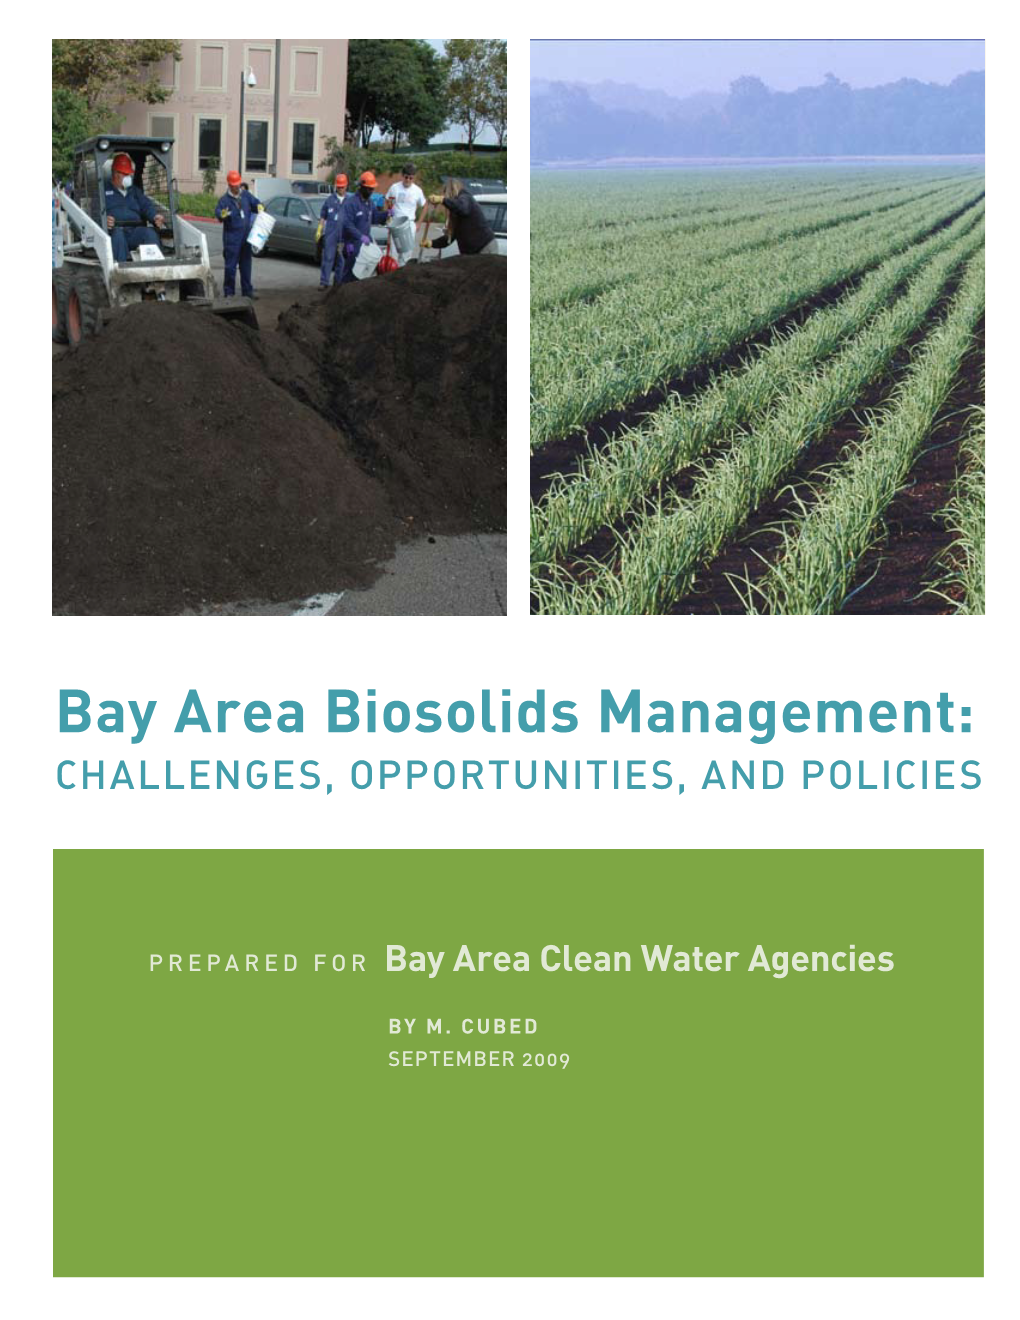 Bay Area Biosolids Management: Challenges, Opportunities, and Policies